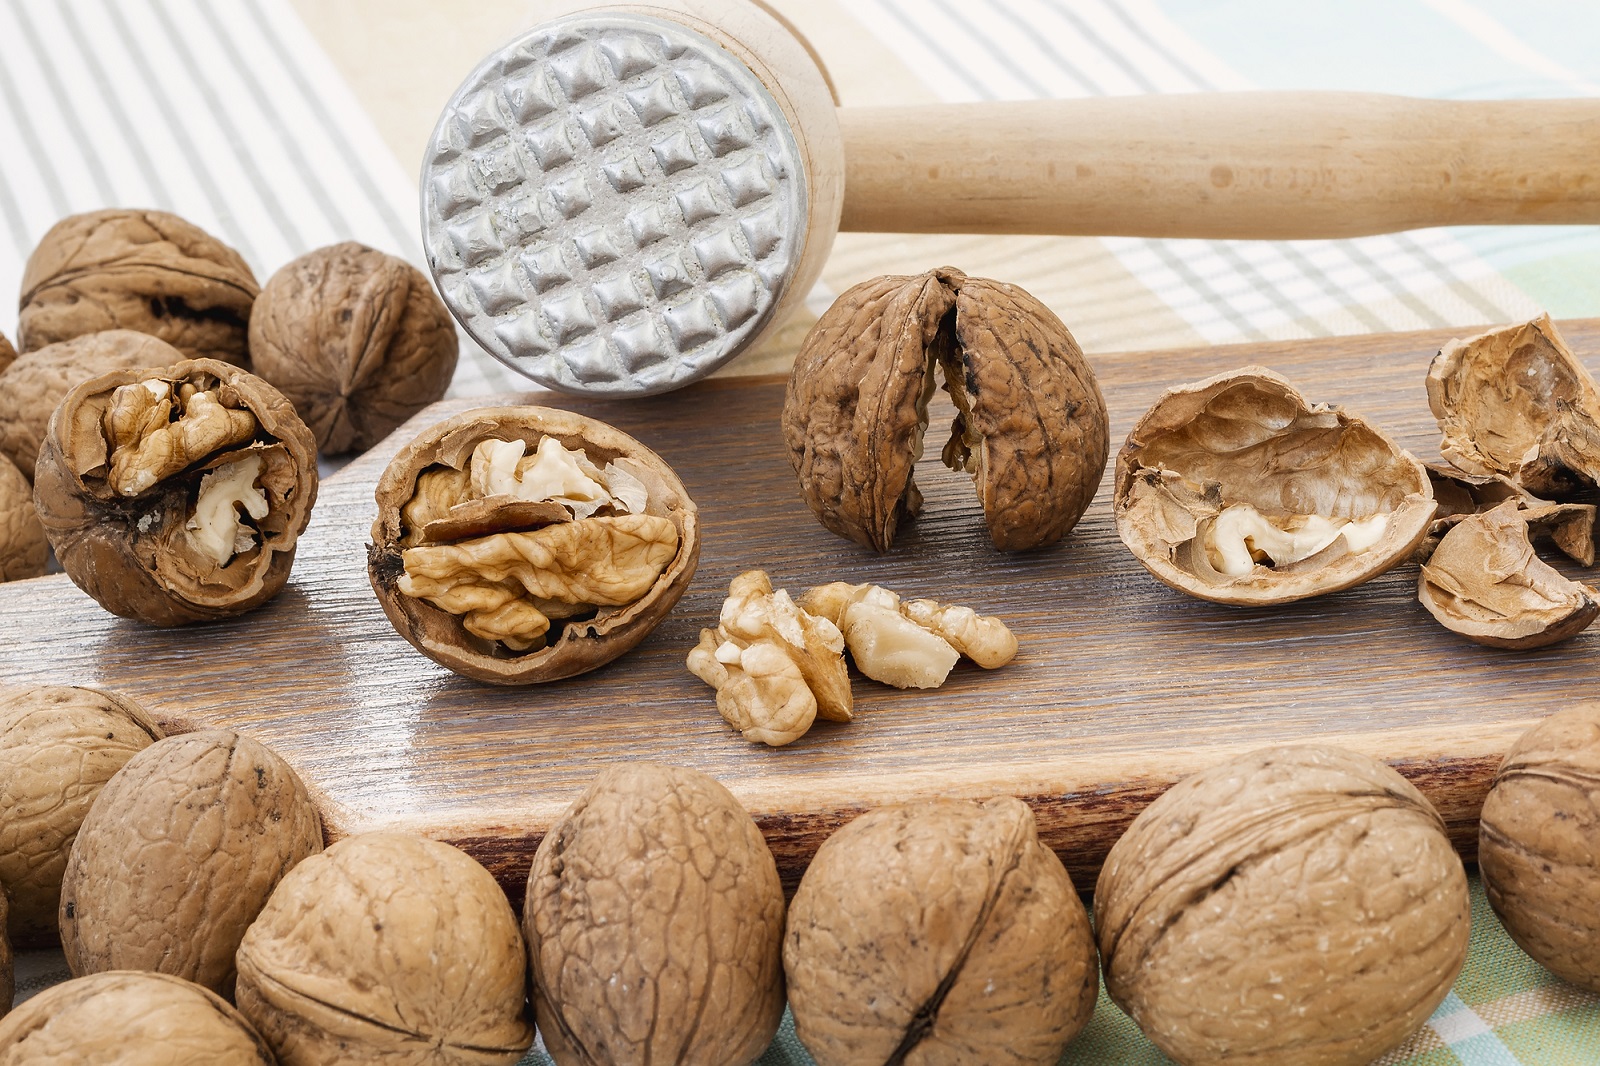 Front view of whole and cracked walnuts (Juglans regia) near wooden meat mallet on a brown wooden board. Natural unbleached nuts. Vegetarian food.